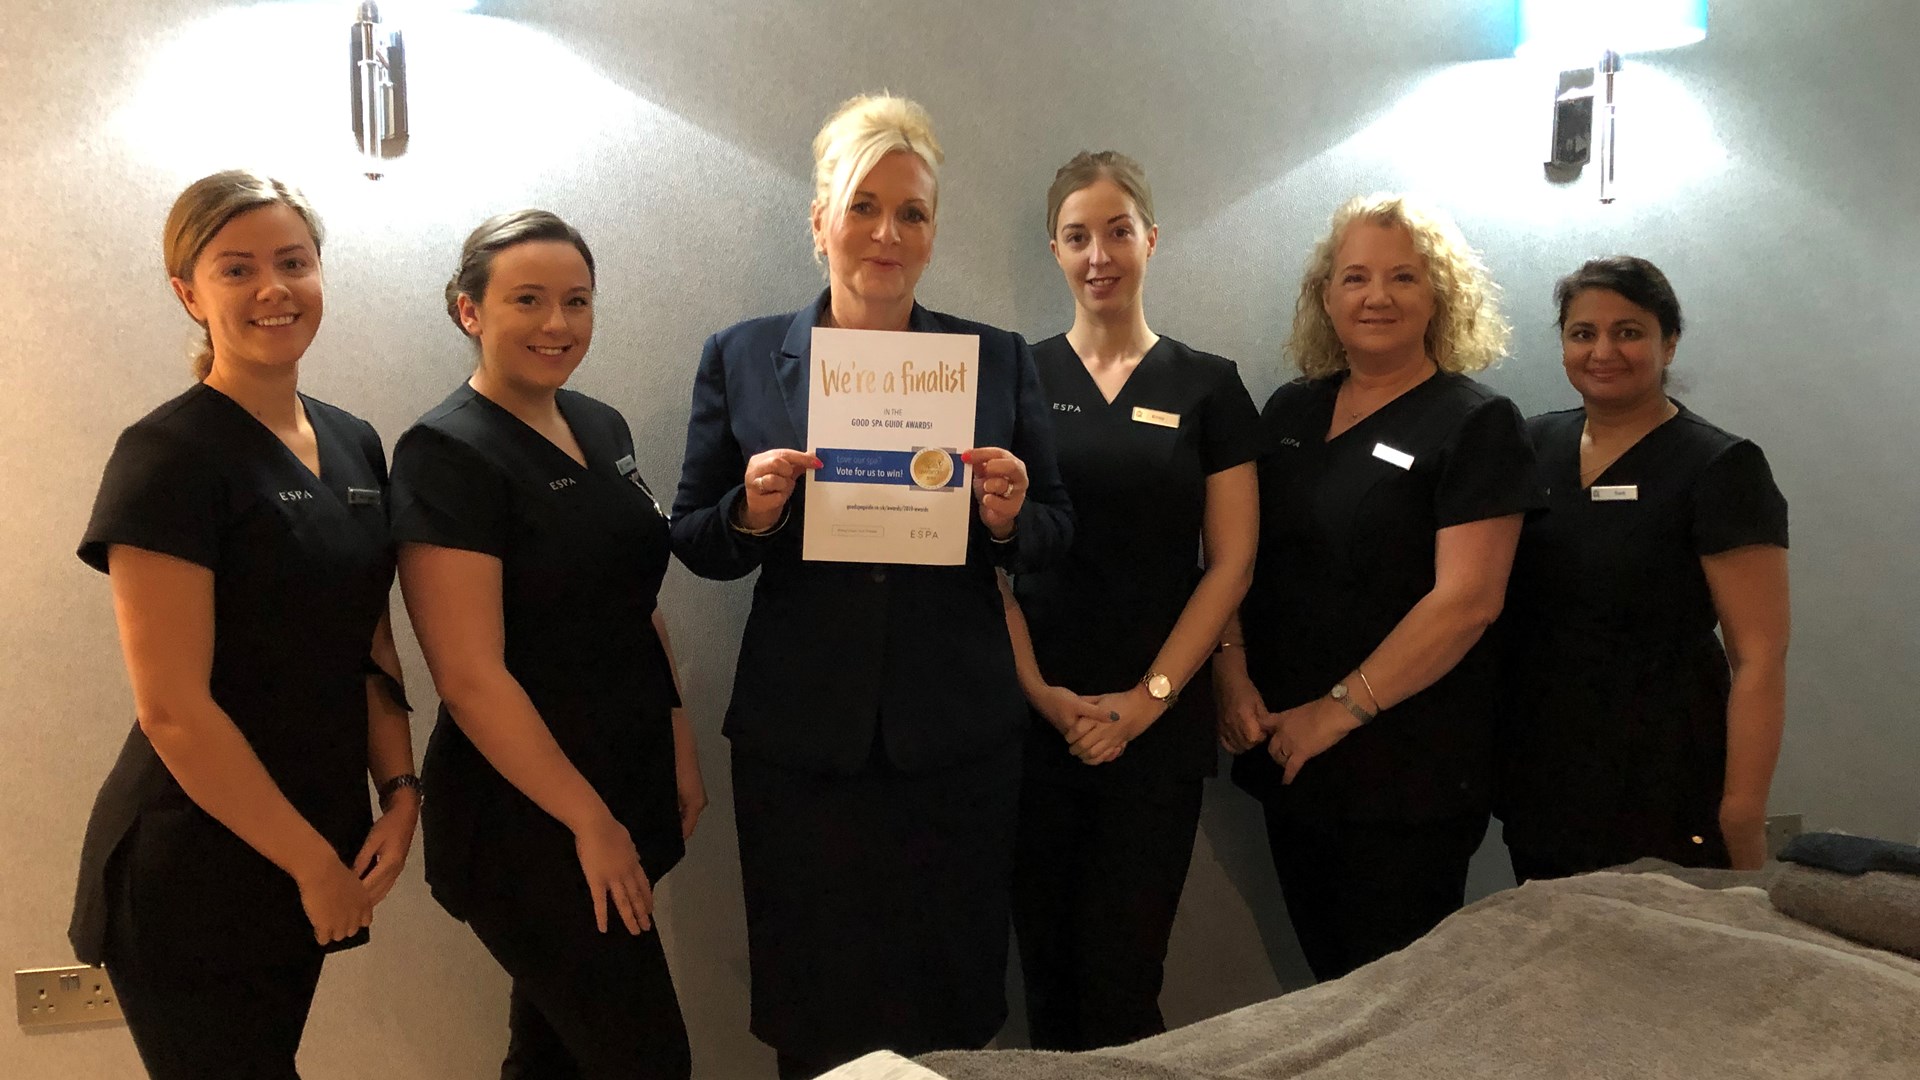 The Belfry Spa team pose with certificate outlining "We're a finalist in the good spa awards"